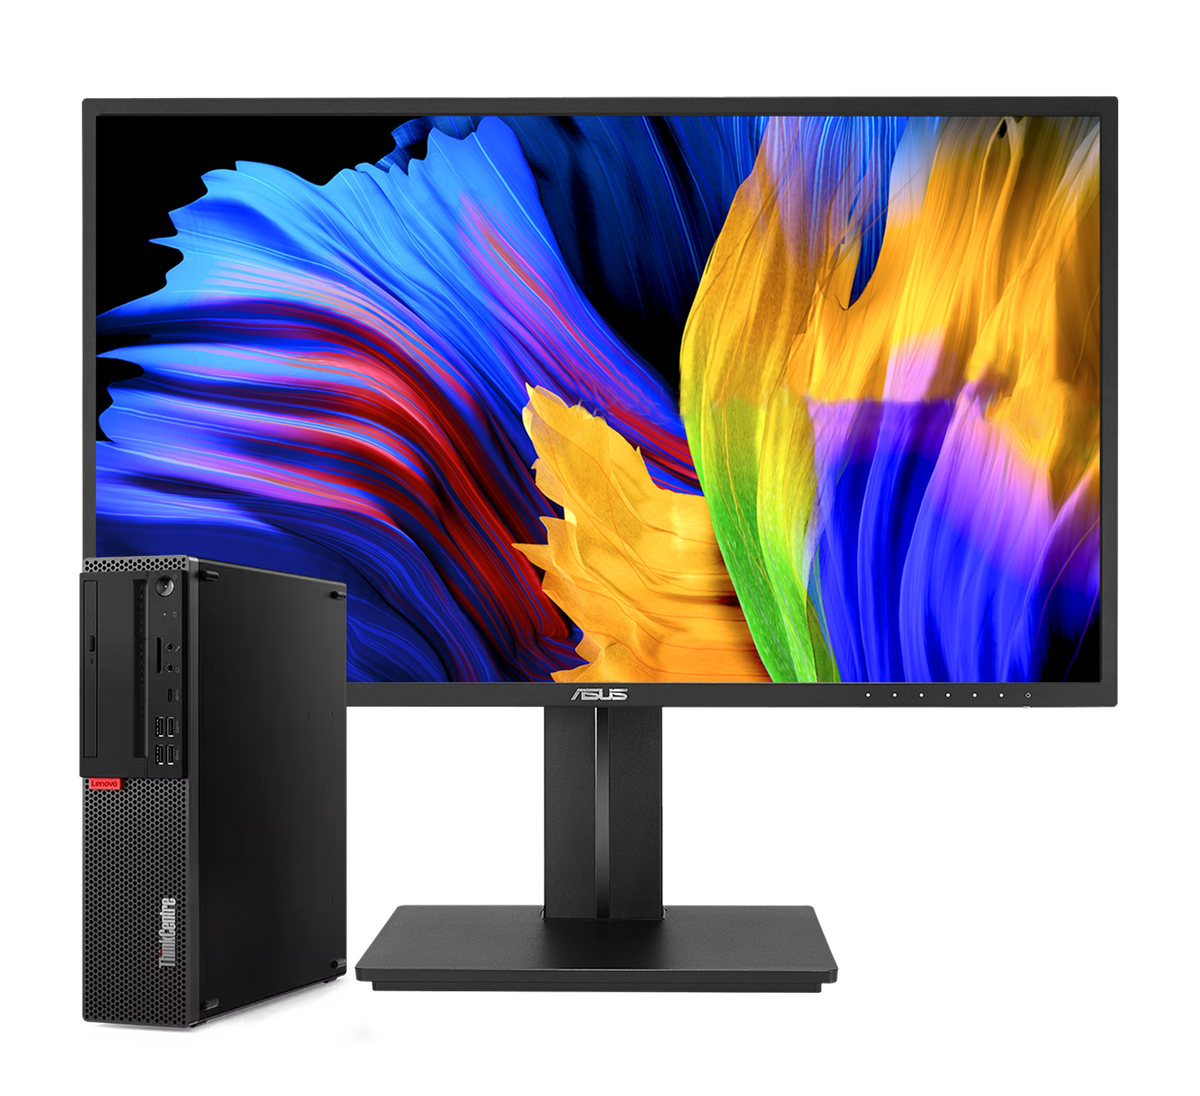 Pack Lenovo Thinkcentre M920s + Asus Be24a / Core I5 8500 3ghz / 8Gb ram / 500Gb / 24" ergonómico / Win 10 Pro ¡Ex-demo!